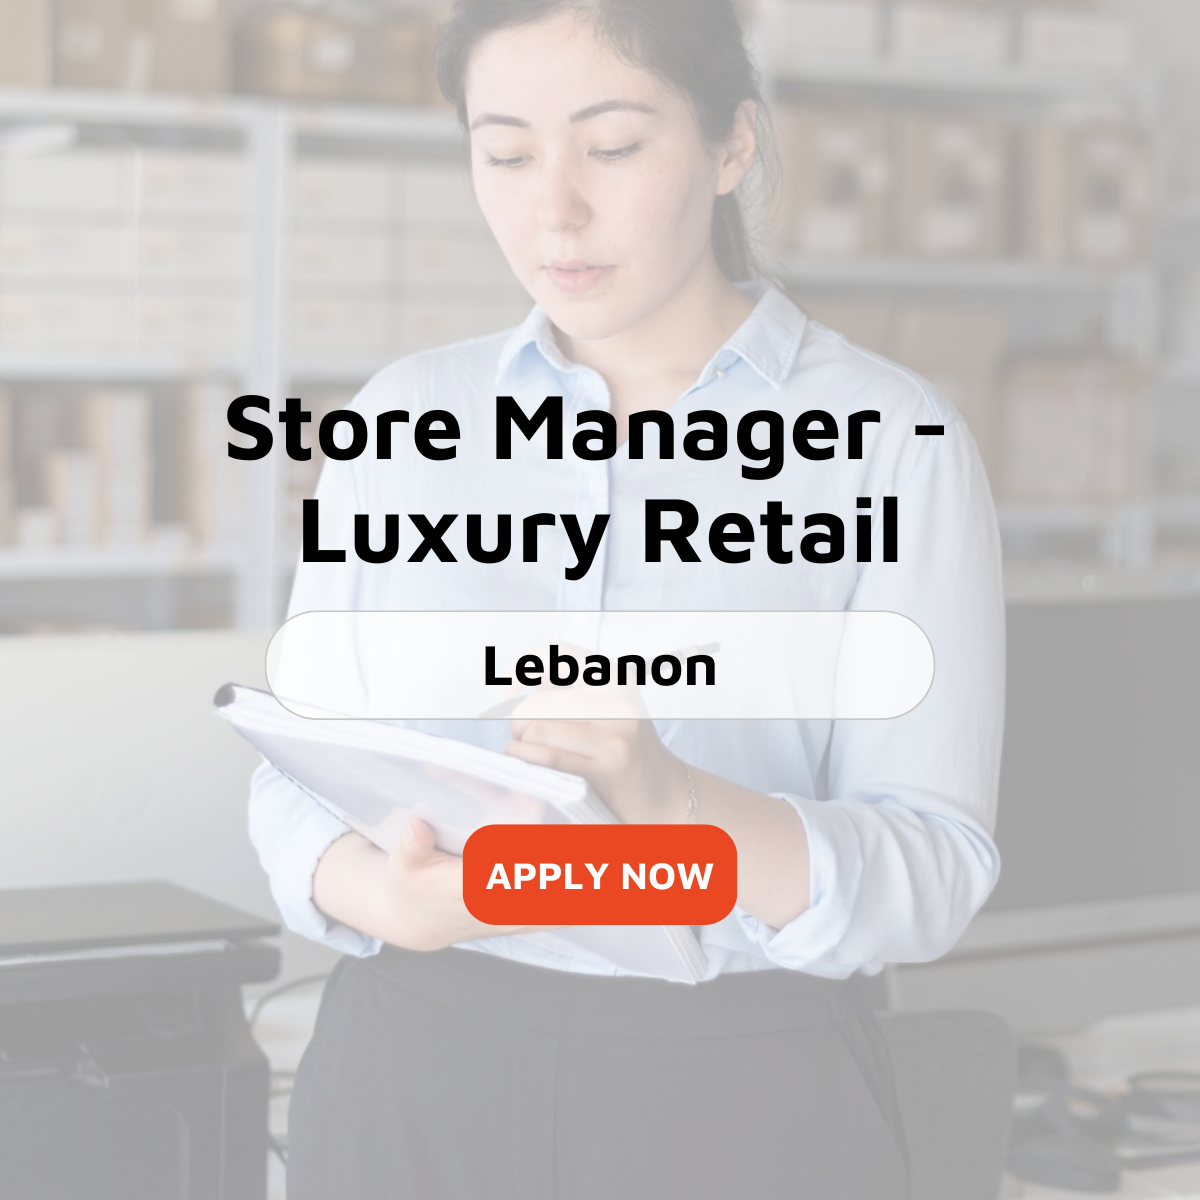 Store Manager - Luxury Retail